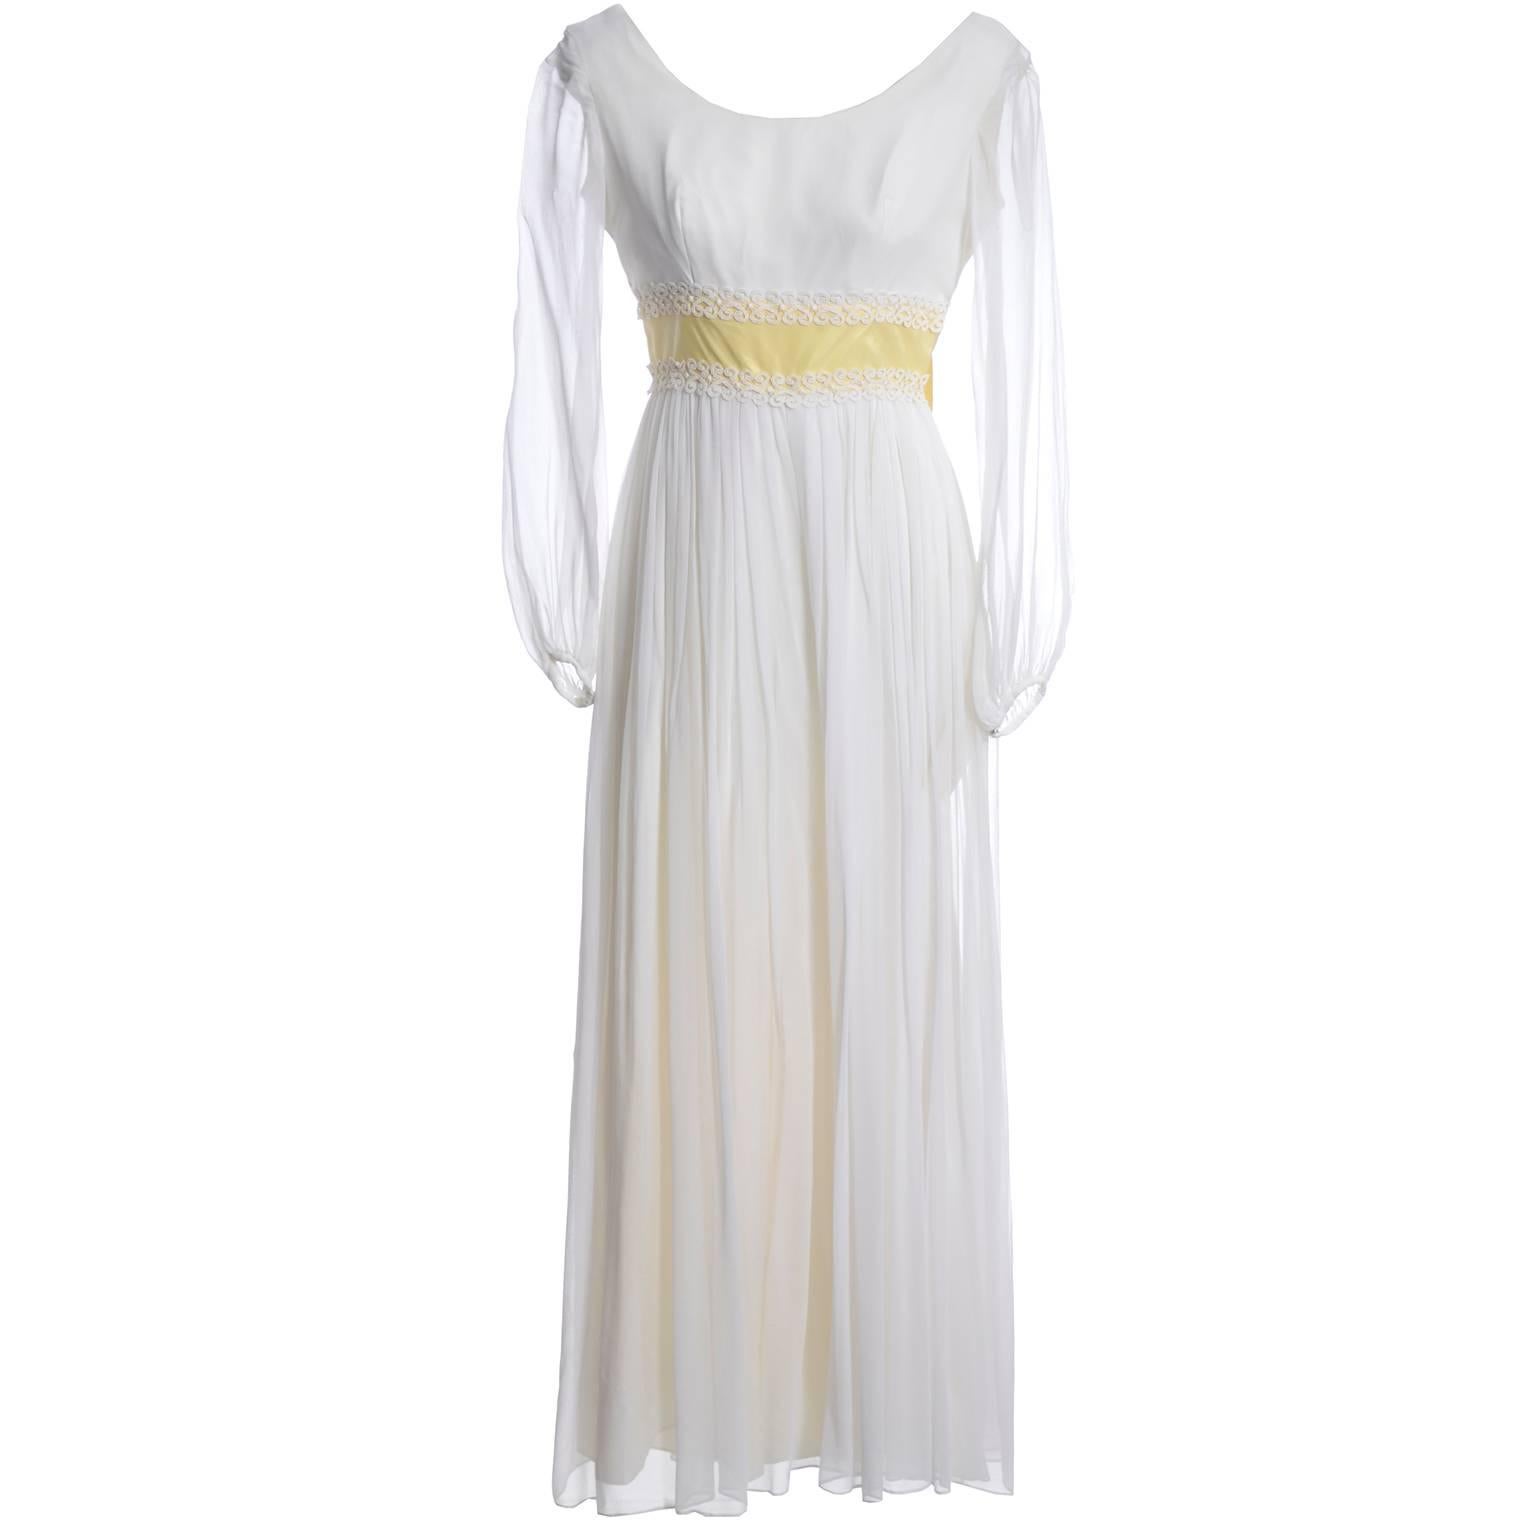 This outstanding 1960s white silk chiffon vintage dress has fantastic satin palazzo pants underneath! The dress has a yellow moire satin ribbon and back bow and is trimmed in lace. The long sleeves are sheer and the dress closes with a back metal